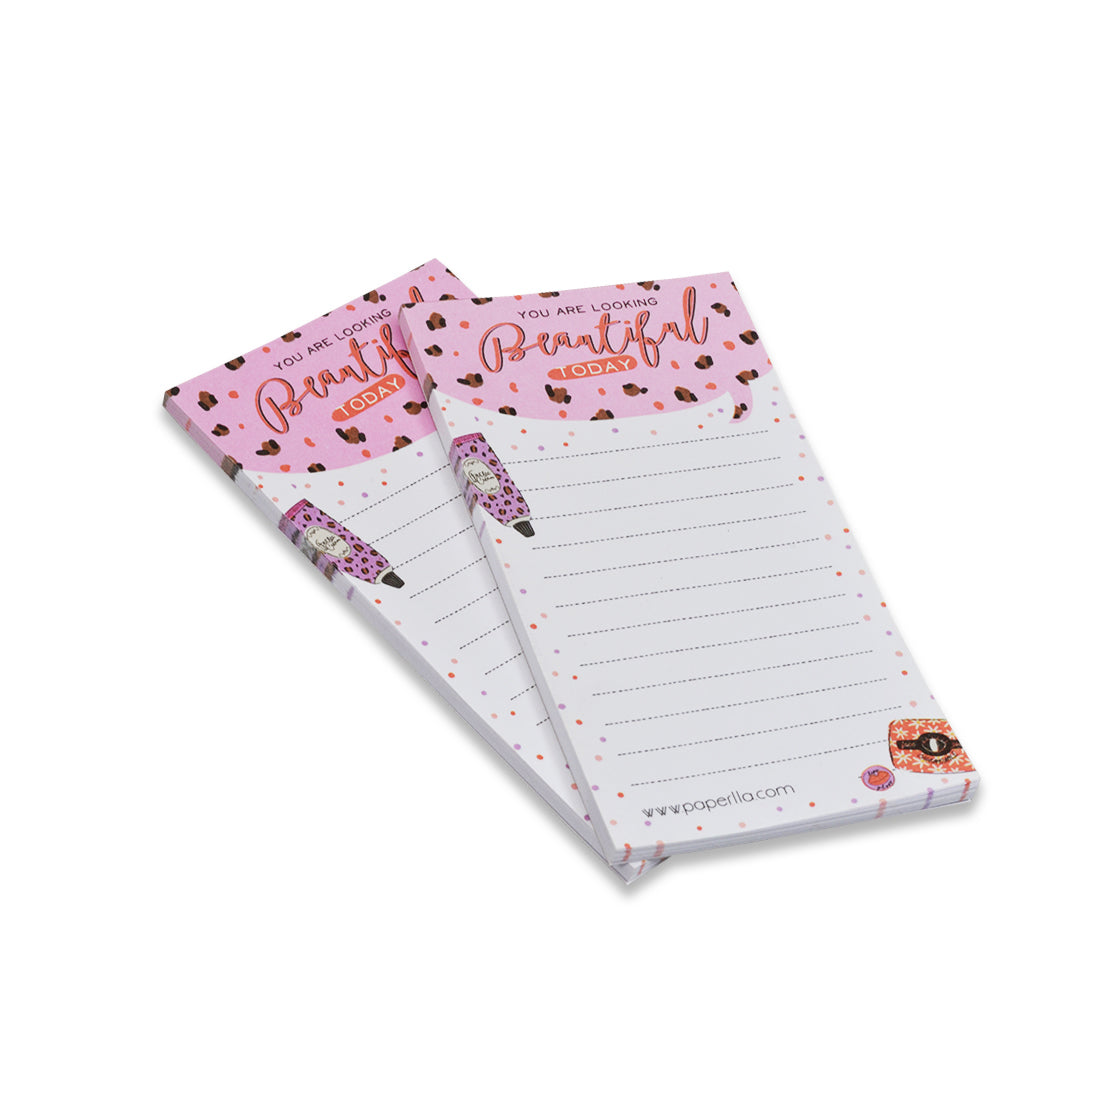 Planner Notepad - 50 Tear-Off Sheets, Notepad Organizer with Space for Daily Schedule, to Do List, Notes, and Habit Tracker Set of 10 Pads